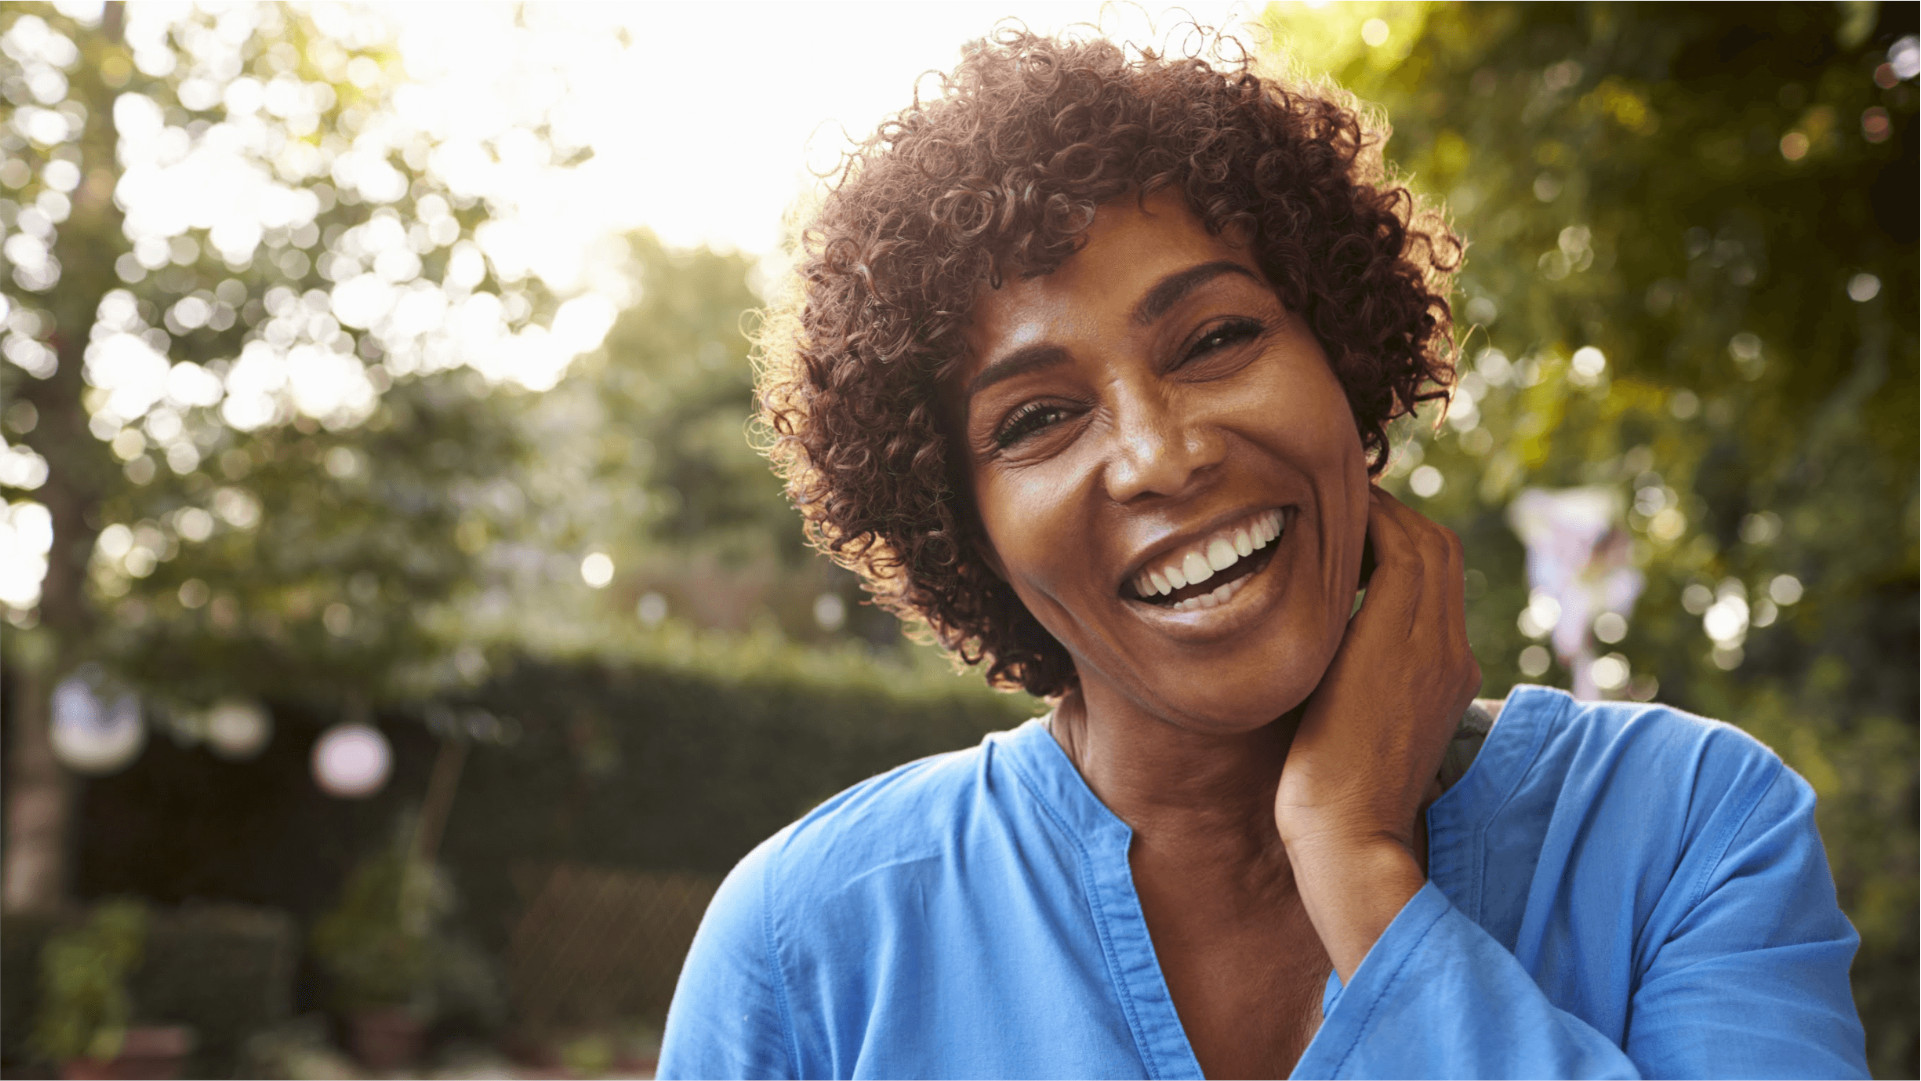 Can Uterine Fibroids Grow During Menopause